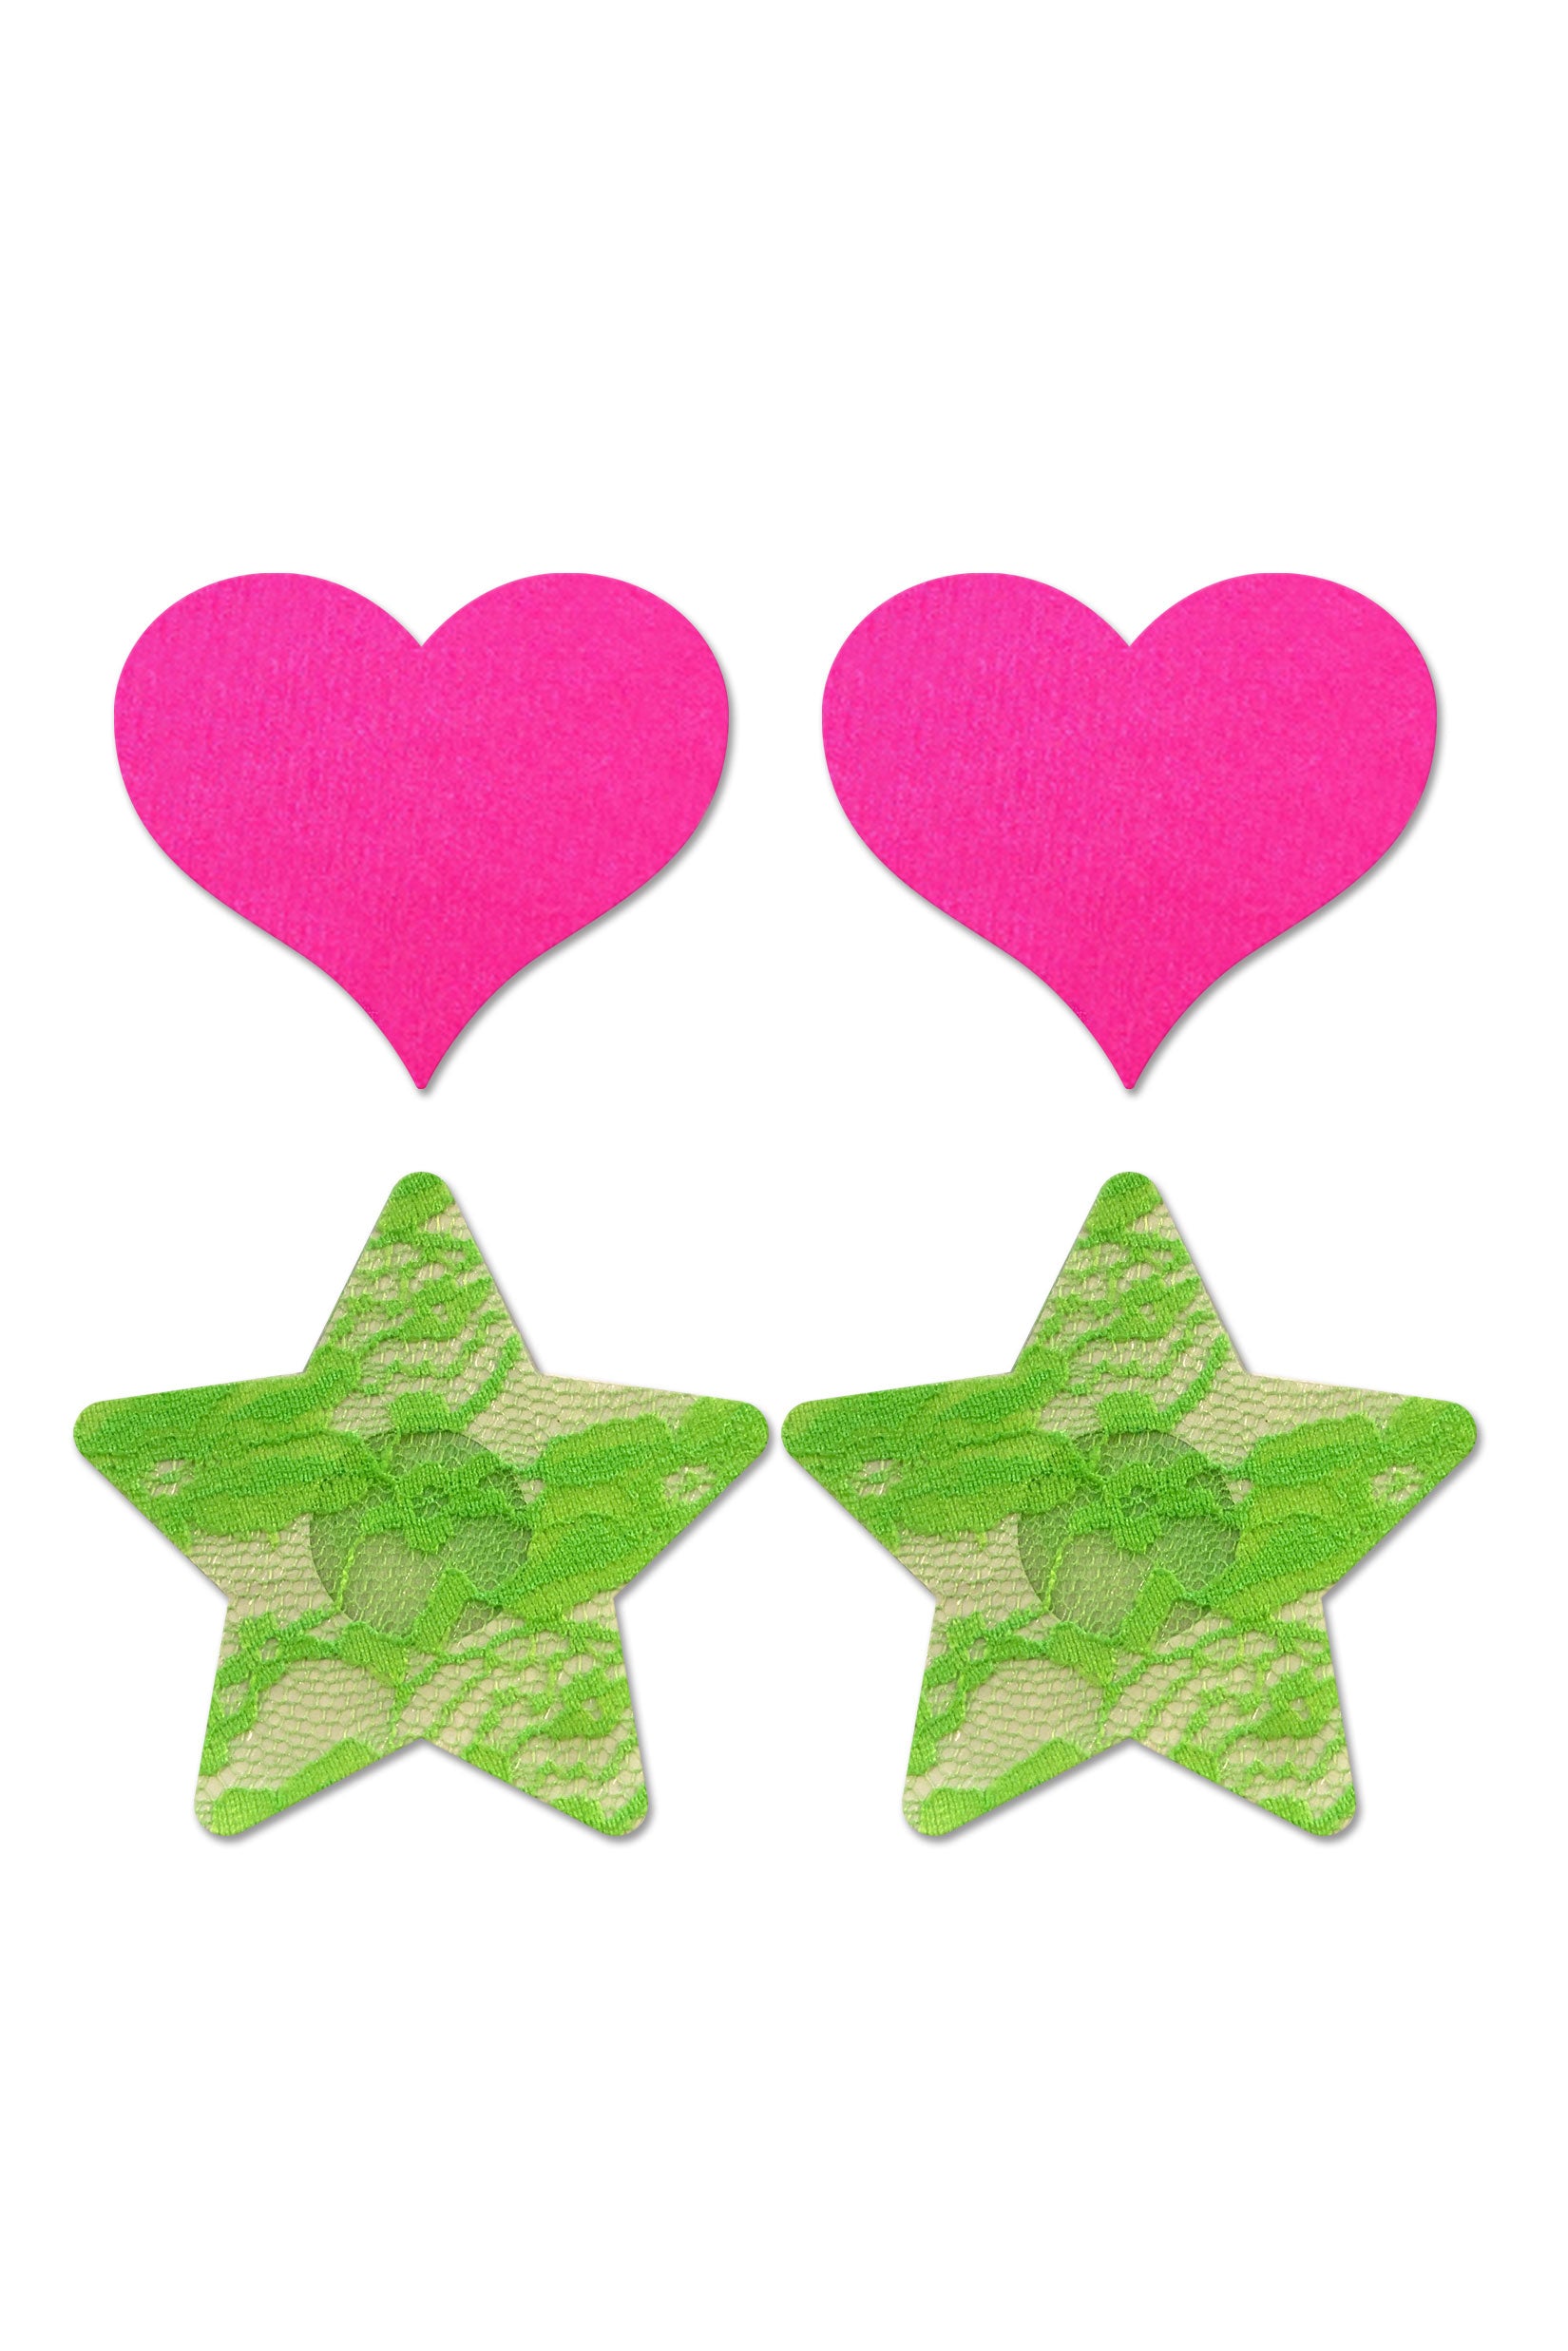 Fashion Pasties Set - Neon Pink Satin Heart and  Neon Green Lace Star FL-FLA102NEON